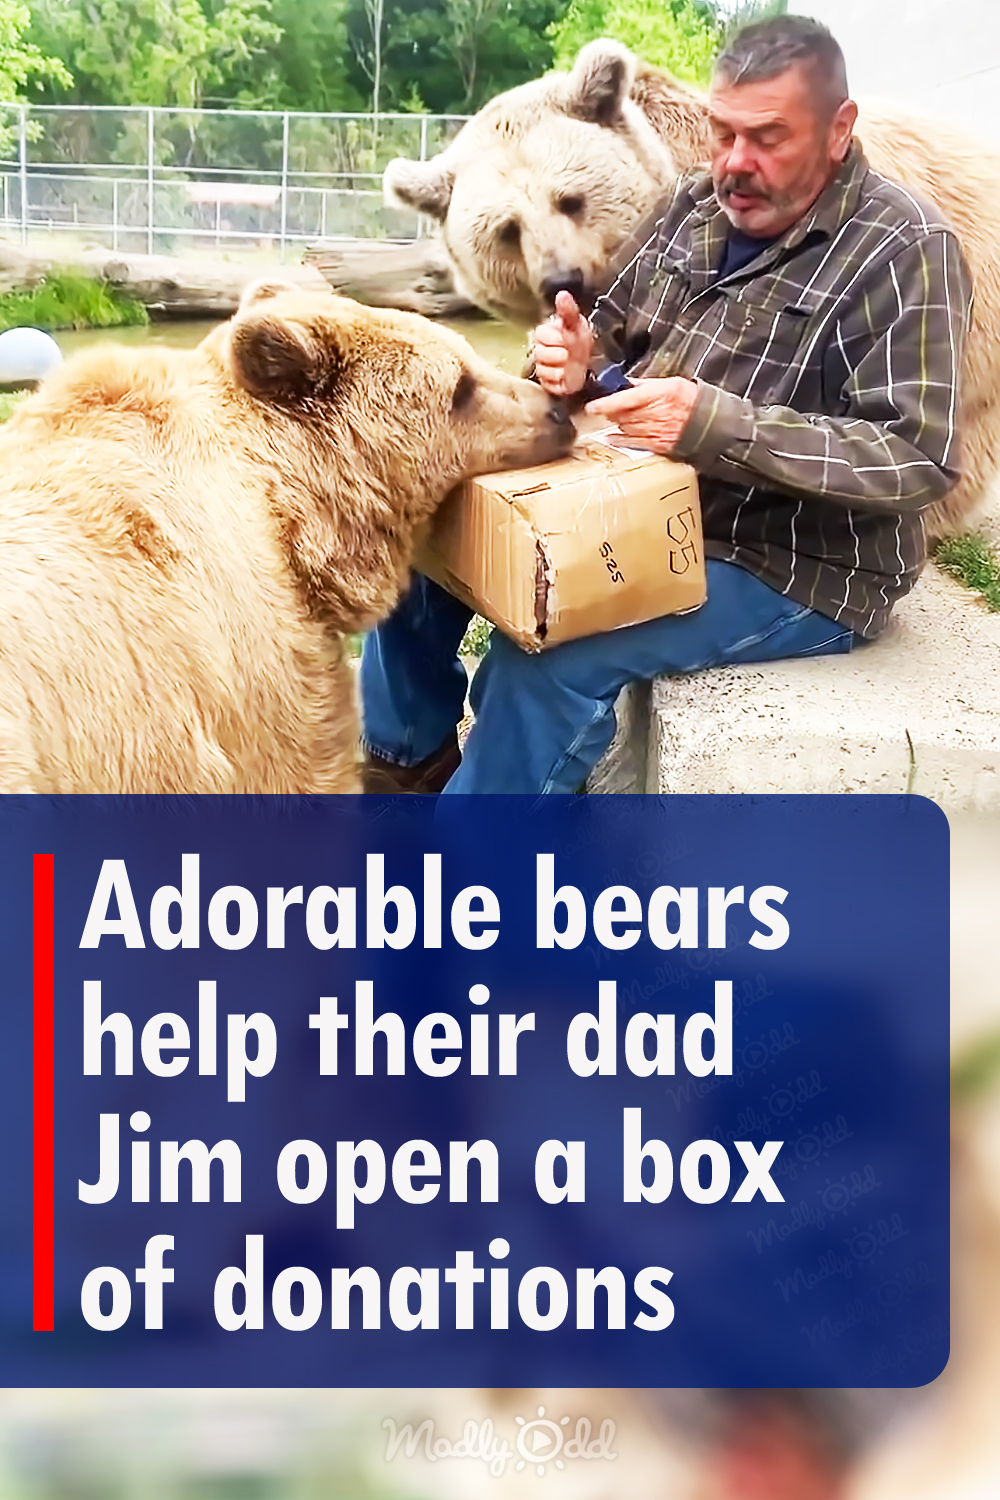 Adorable bears help their dad Jim open a box of donations